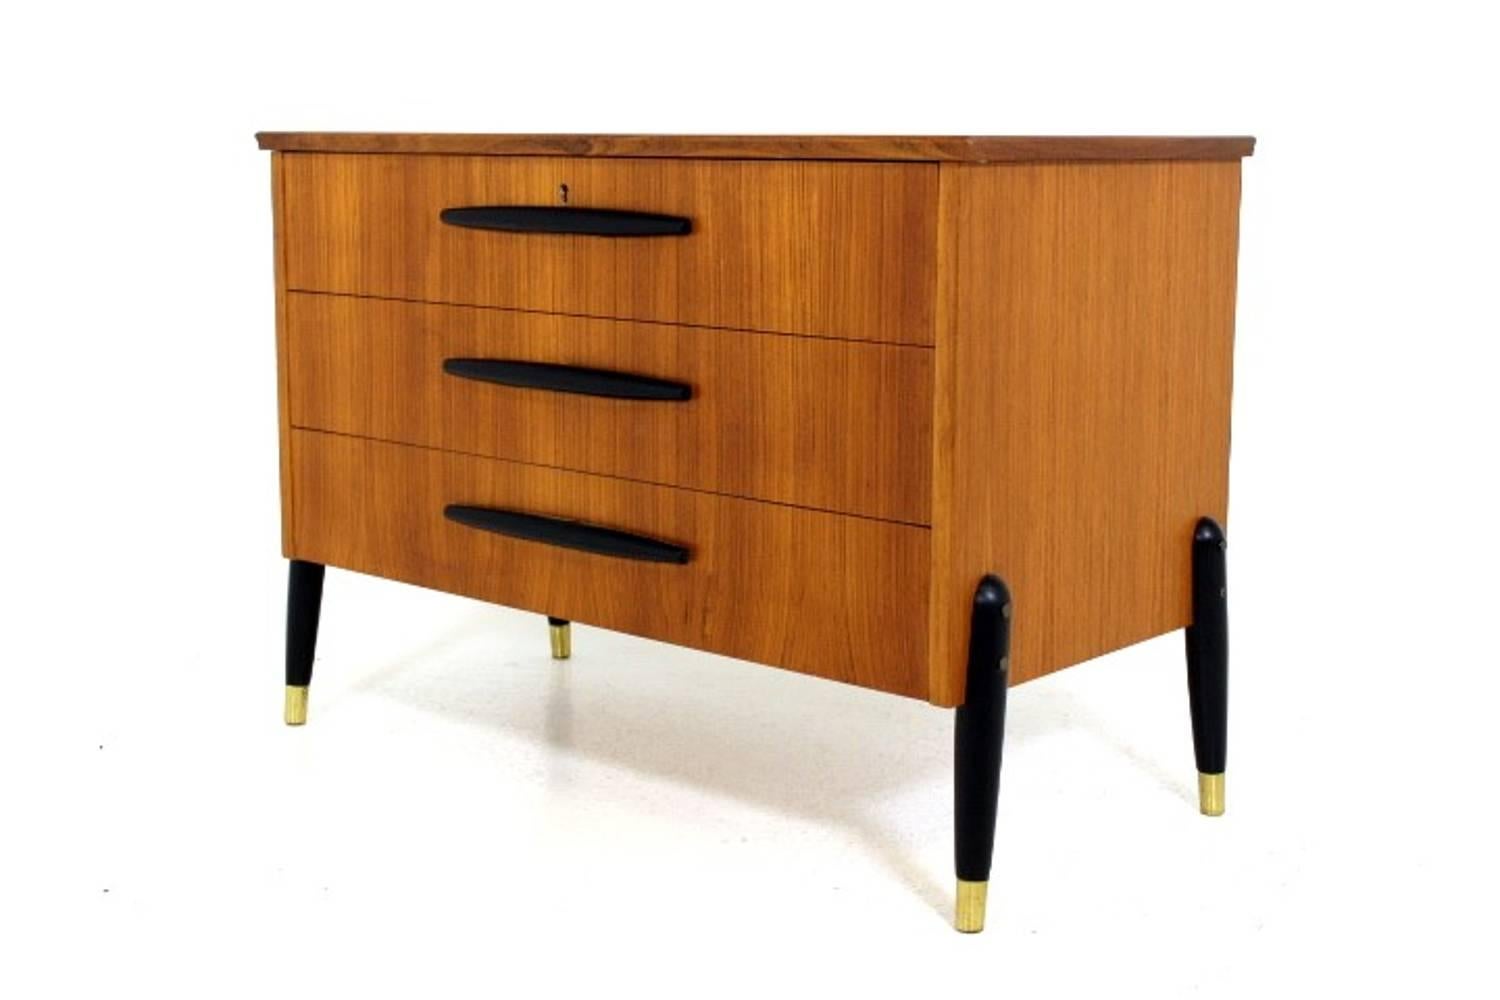 Swedish chest of drawers in teak with black details, 1950s.